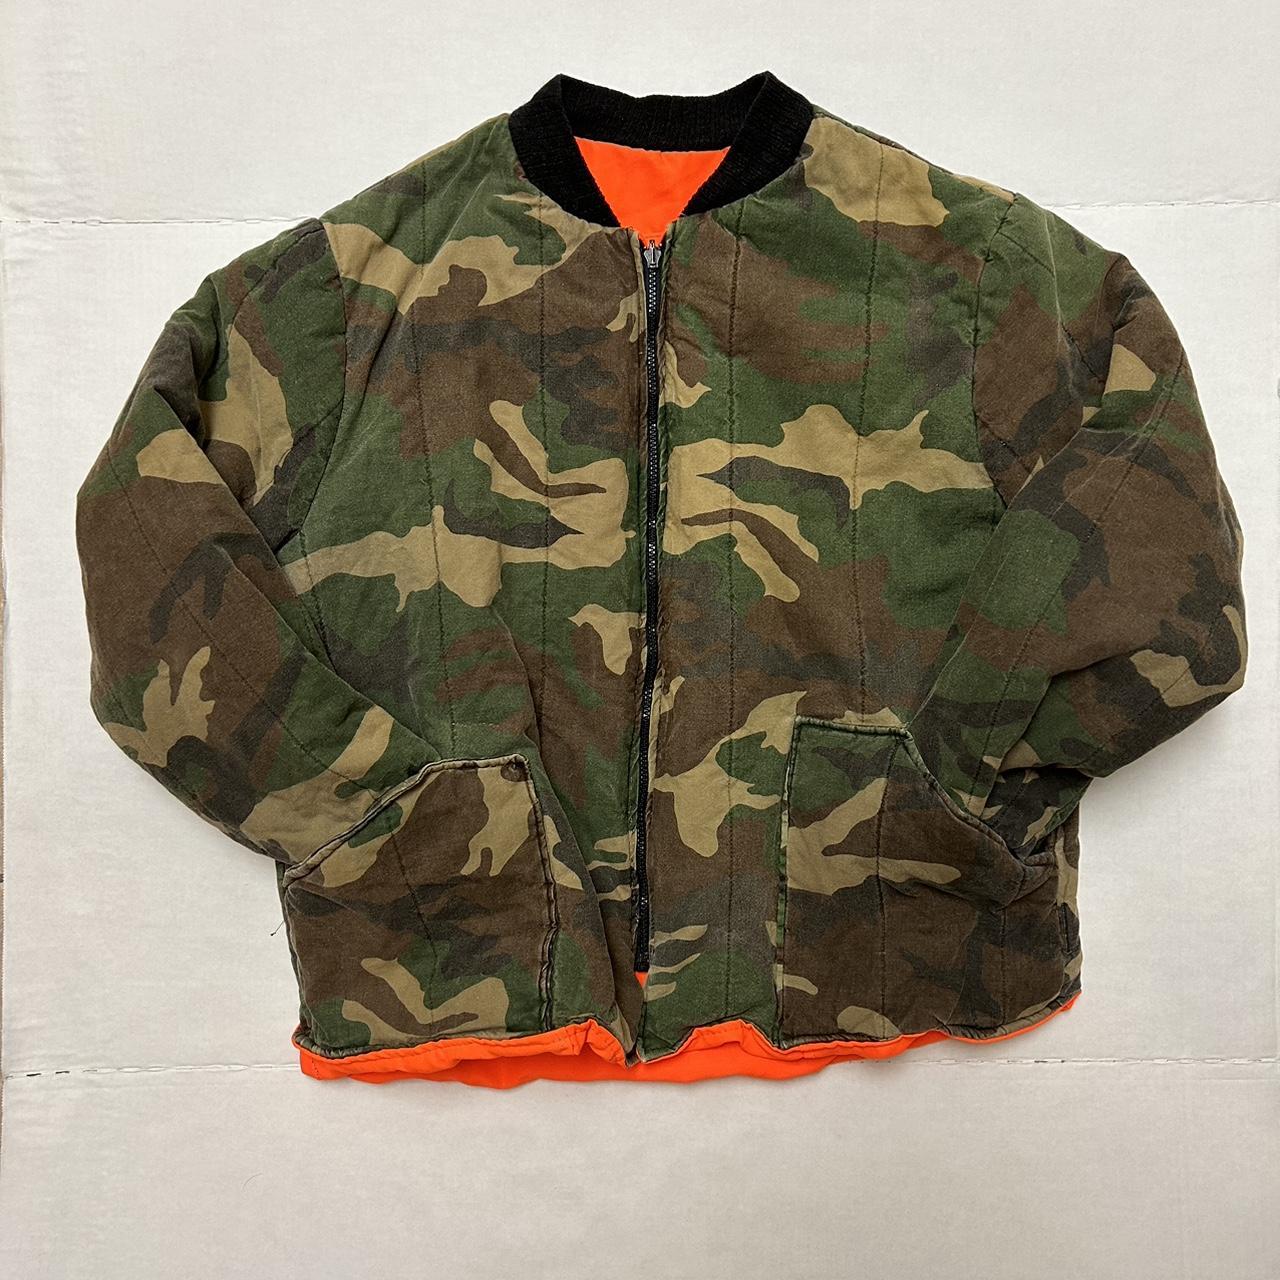 Early 1990s hunting bomber jacket - reversible... - Depop